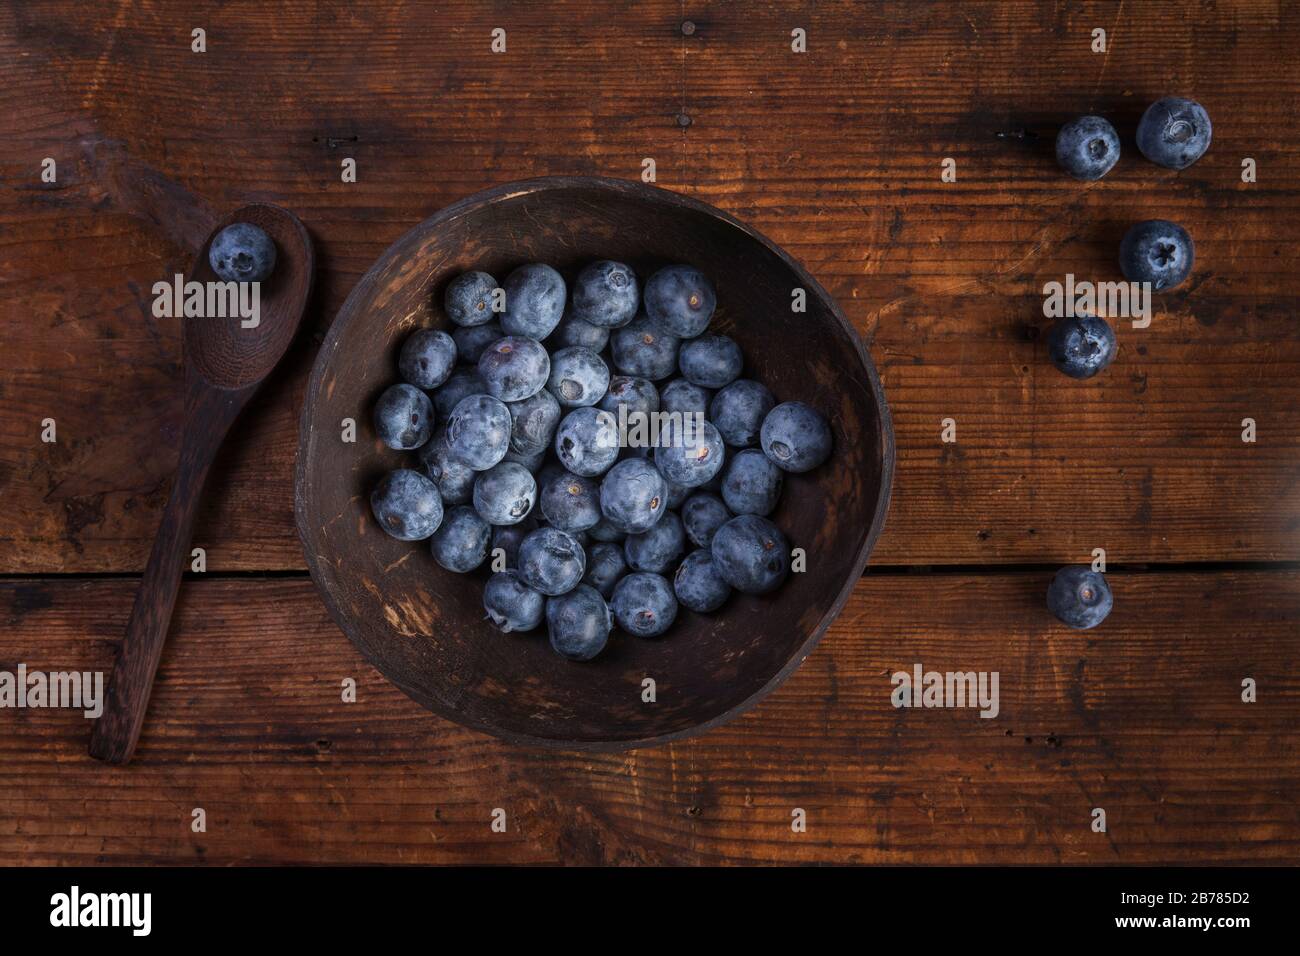 Blueberries or huckleberries in a coconut bowl with a wooden spoon. The bowl is on a rustic wooden table. Seen from above flat lay. There are some blu Stock Photo